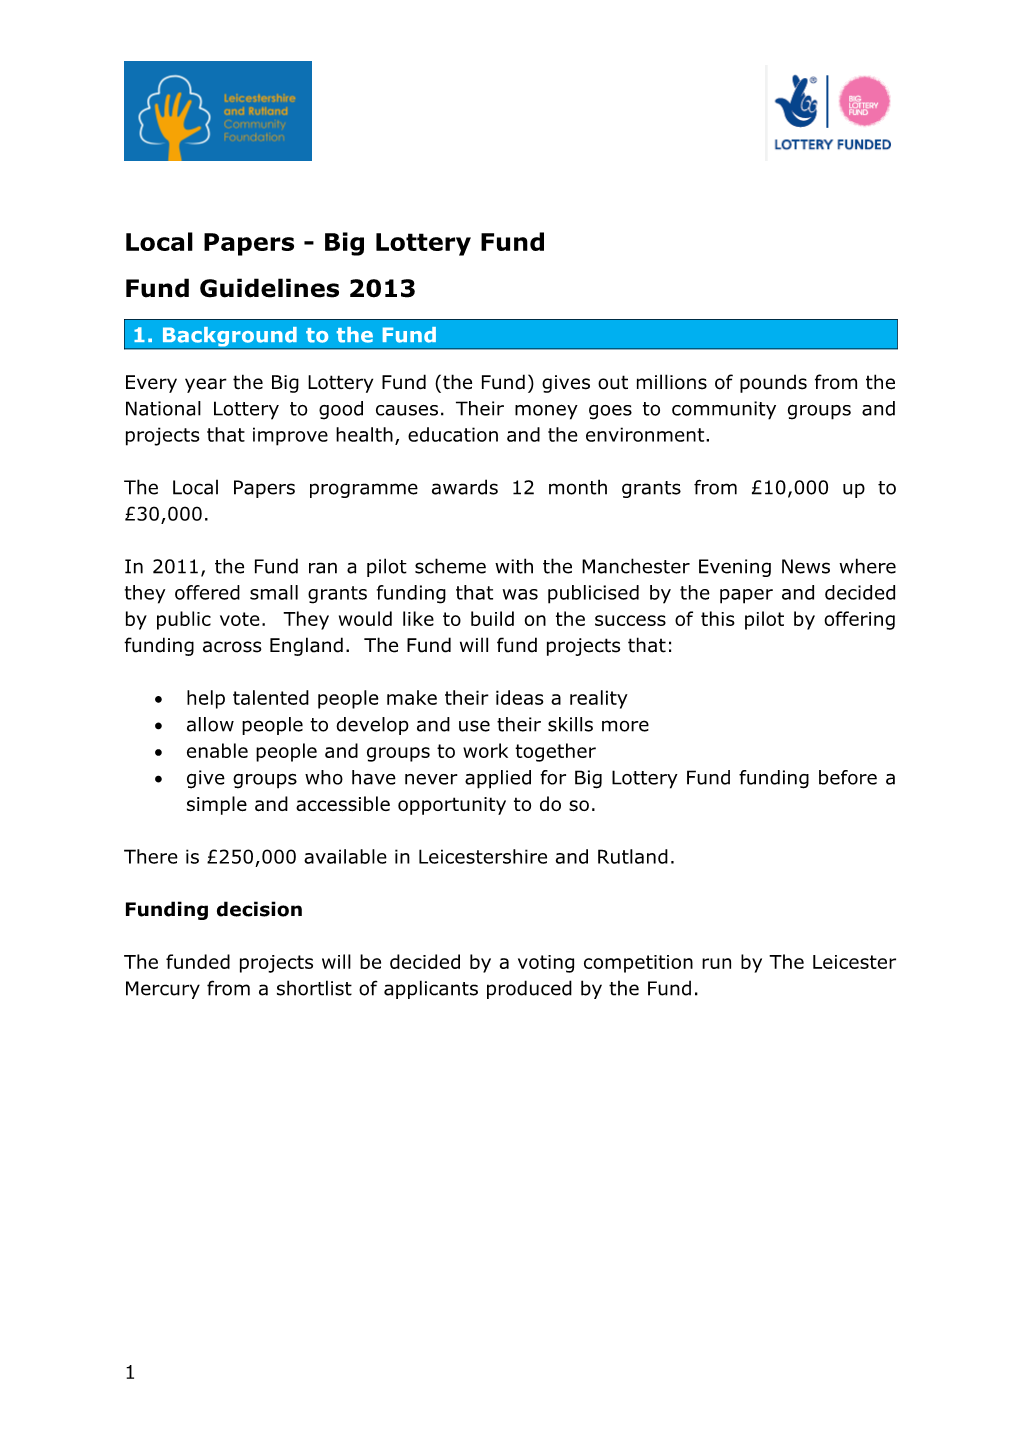 Local Papers - Big Lottery Fund